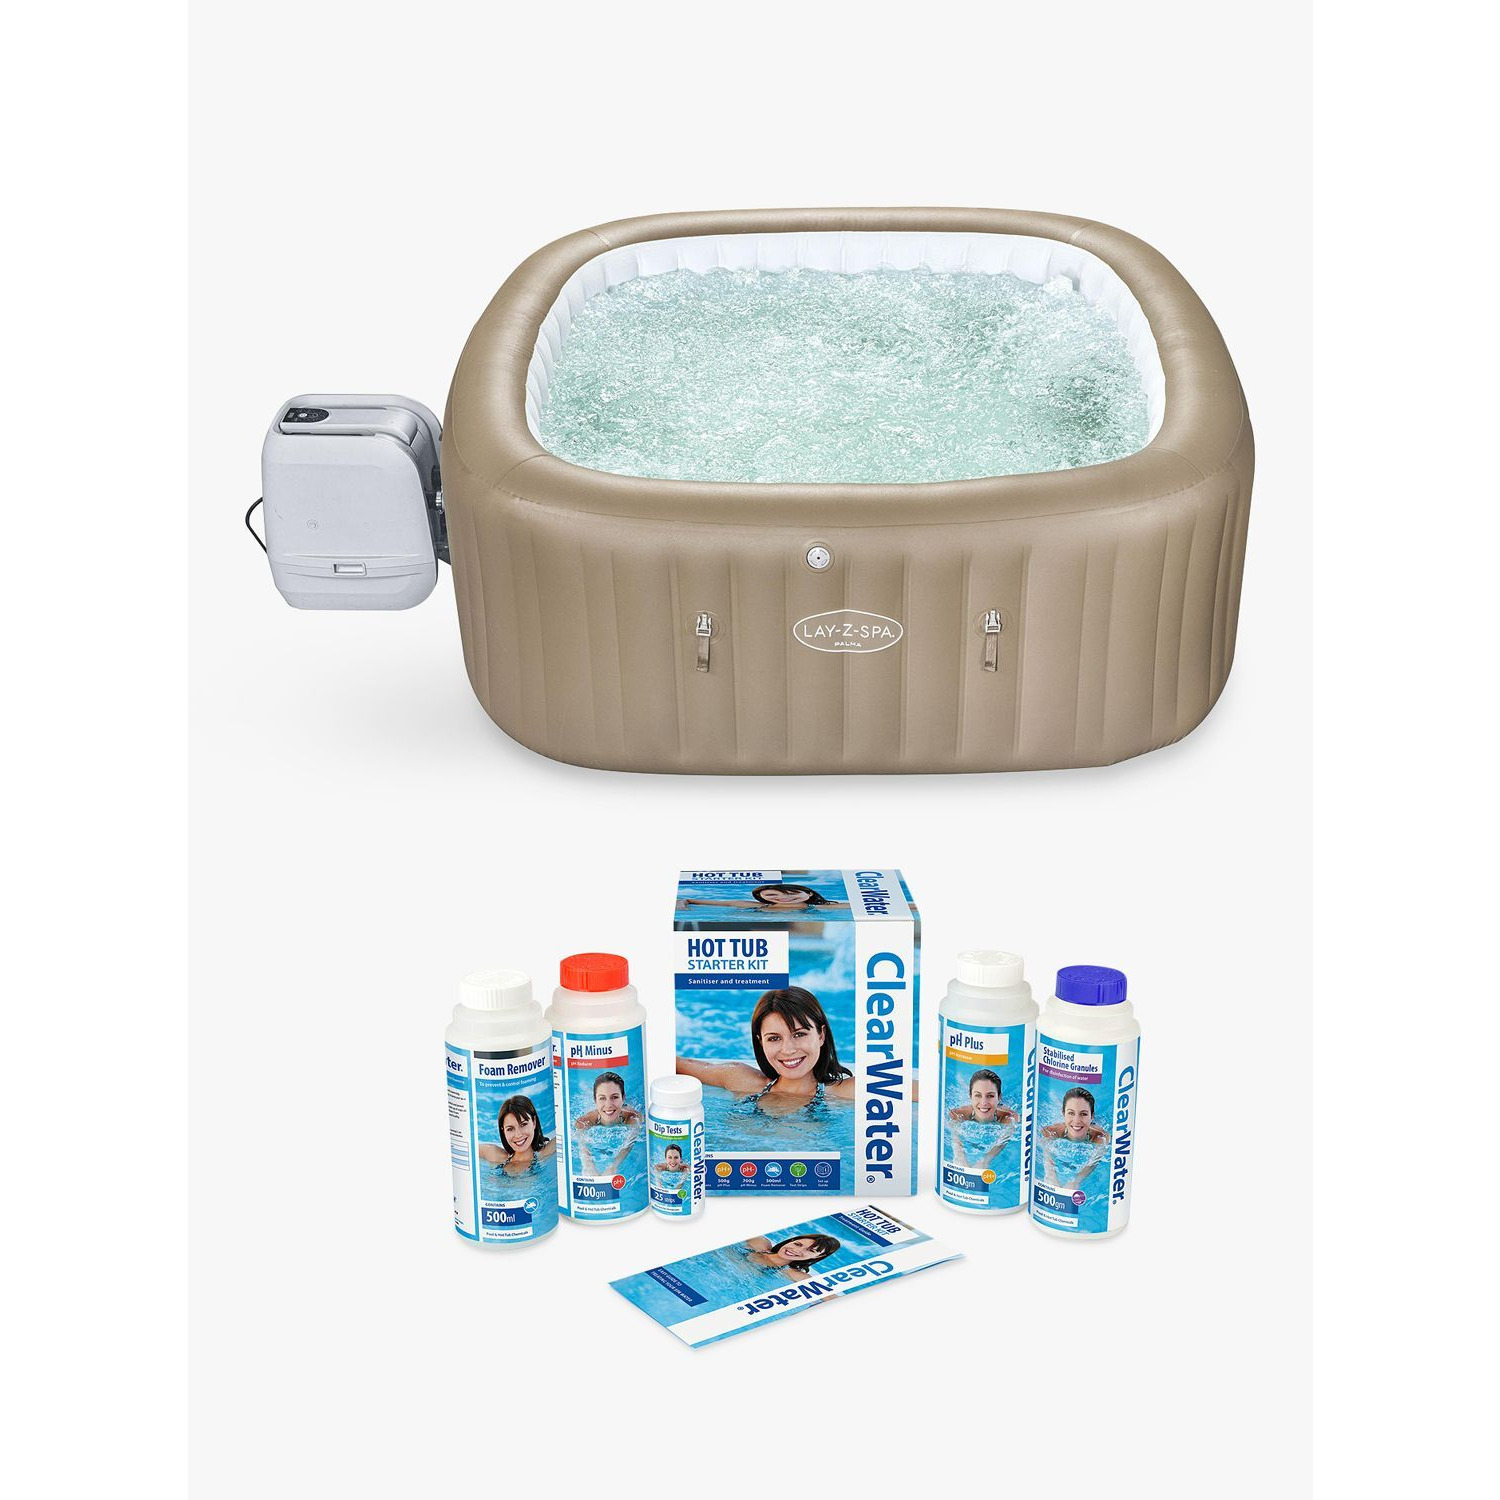 Lay-Z-Spa Palma HydroJet Pro Square Hot Tub with LED Lights, Cover & Clearwater Spa Chemical Starter Kit, 7 Person - image 1